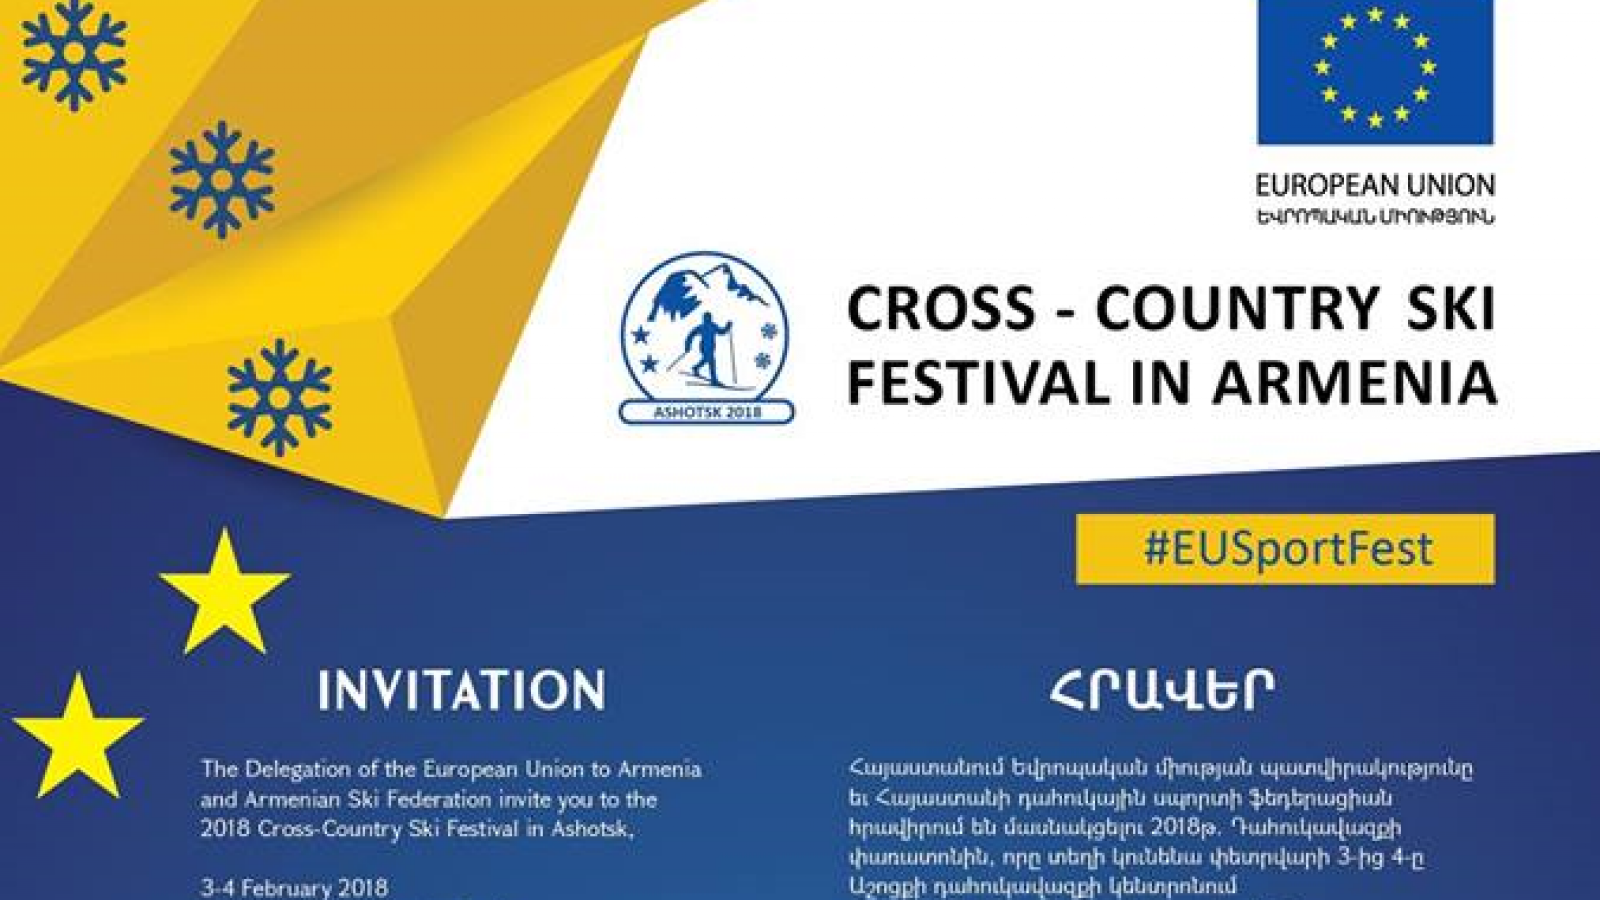 EU supports cross-country skiing festival in Armenia to promote tourism sector development